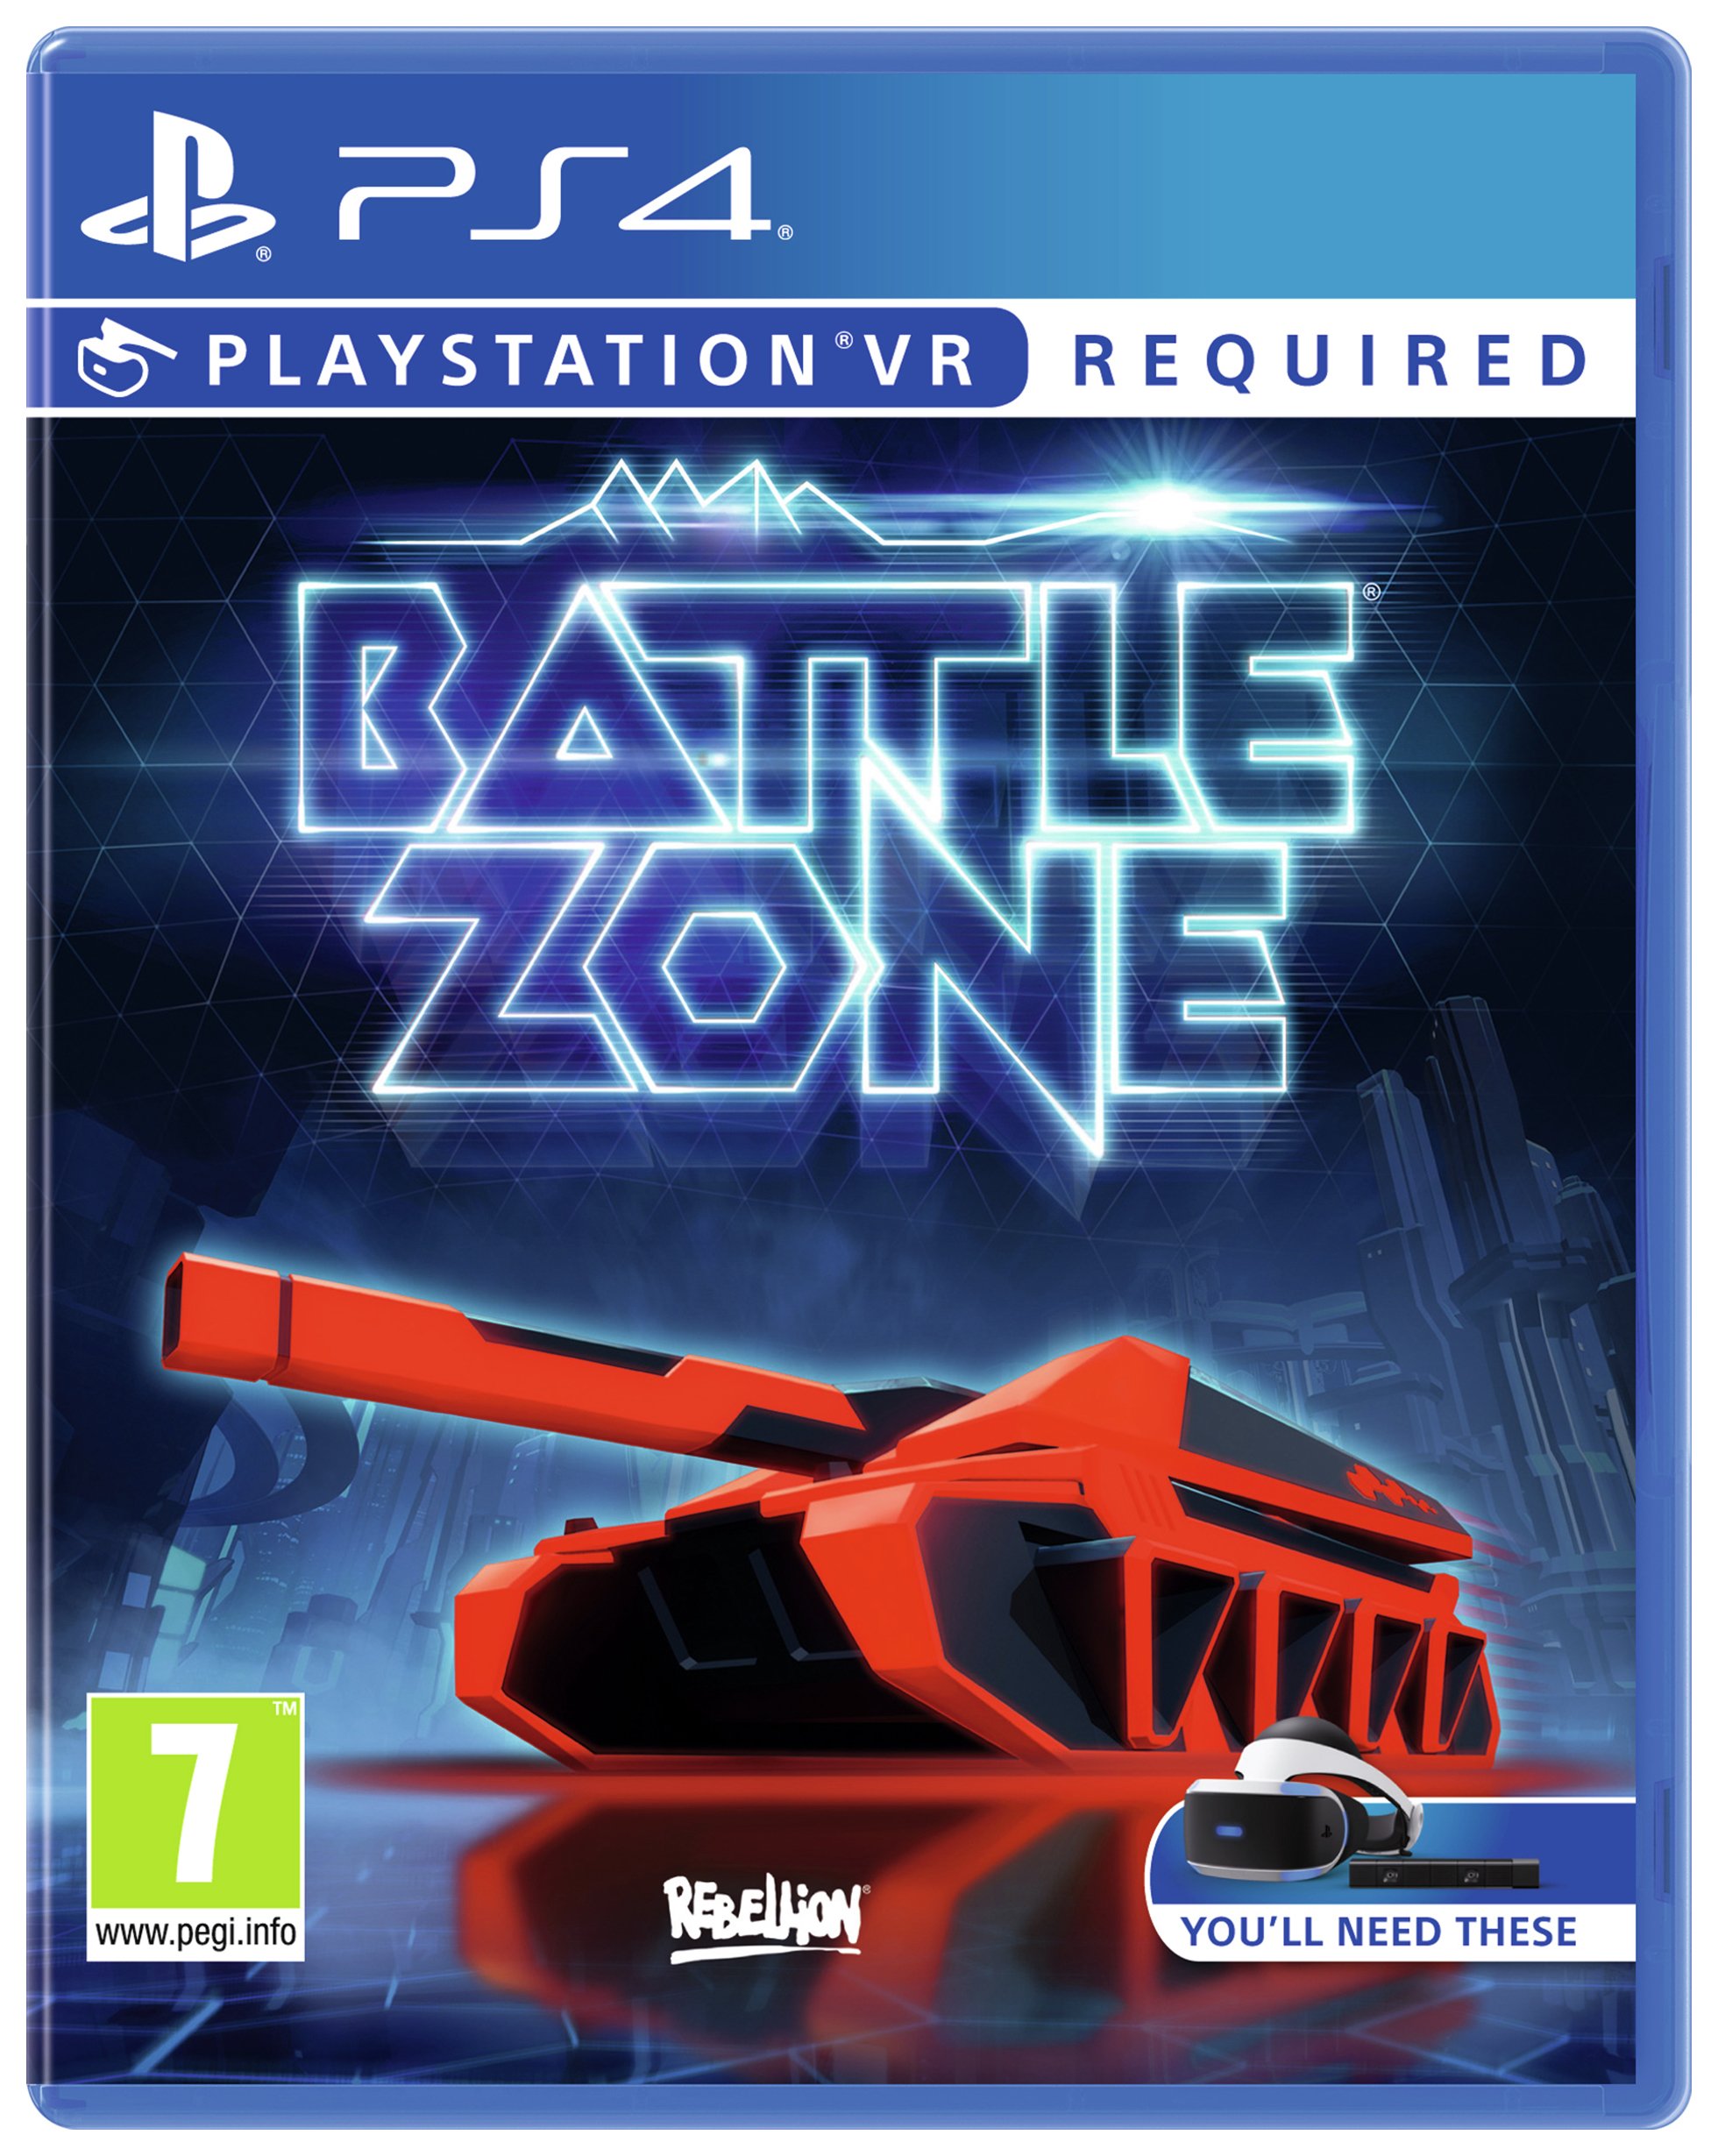 Battlezone PS4 VR Game.